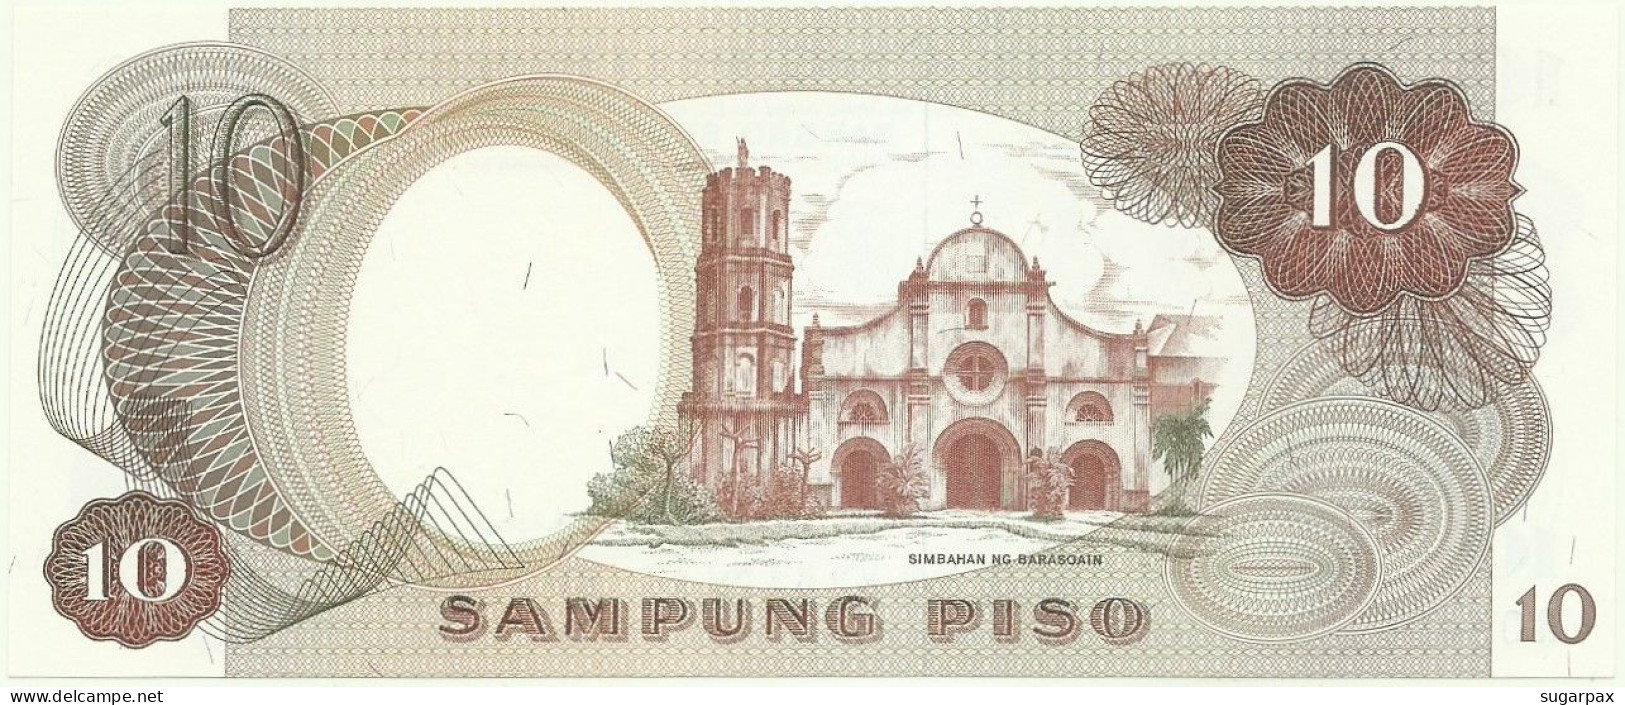 Philippines - 10 Piso - ND ( 1970s ) - Pick 144.b - Unc. - Sign. 8 - Serie R - Philippines